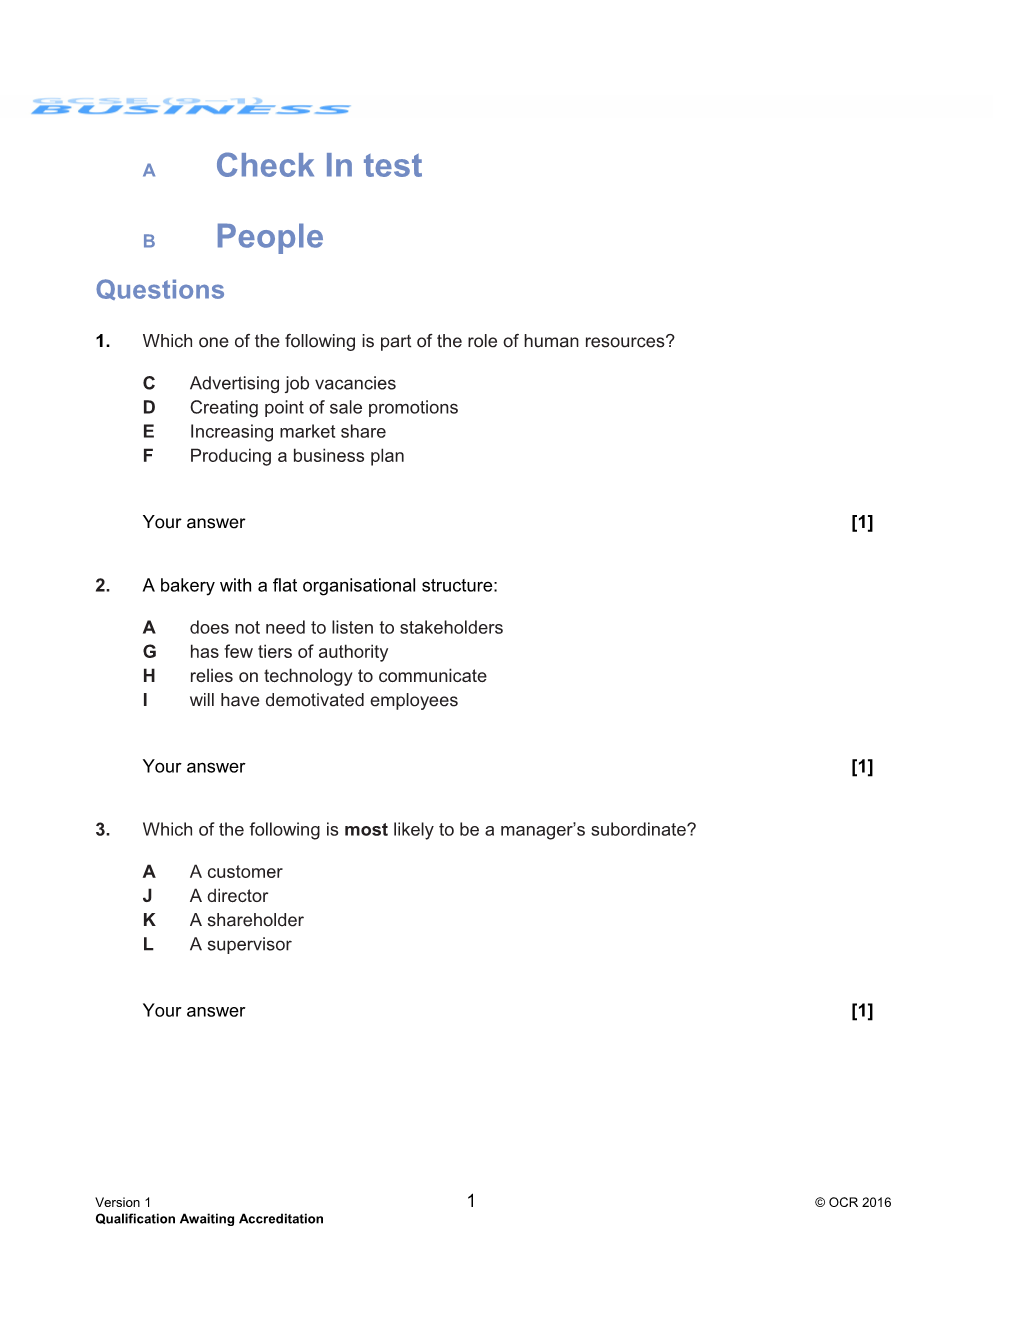 GCSE (9-1) Business Check in Test - Marketing